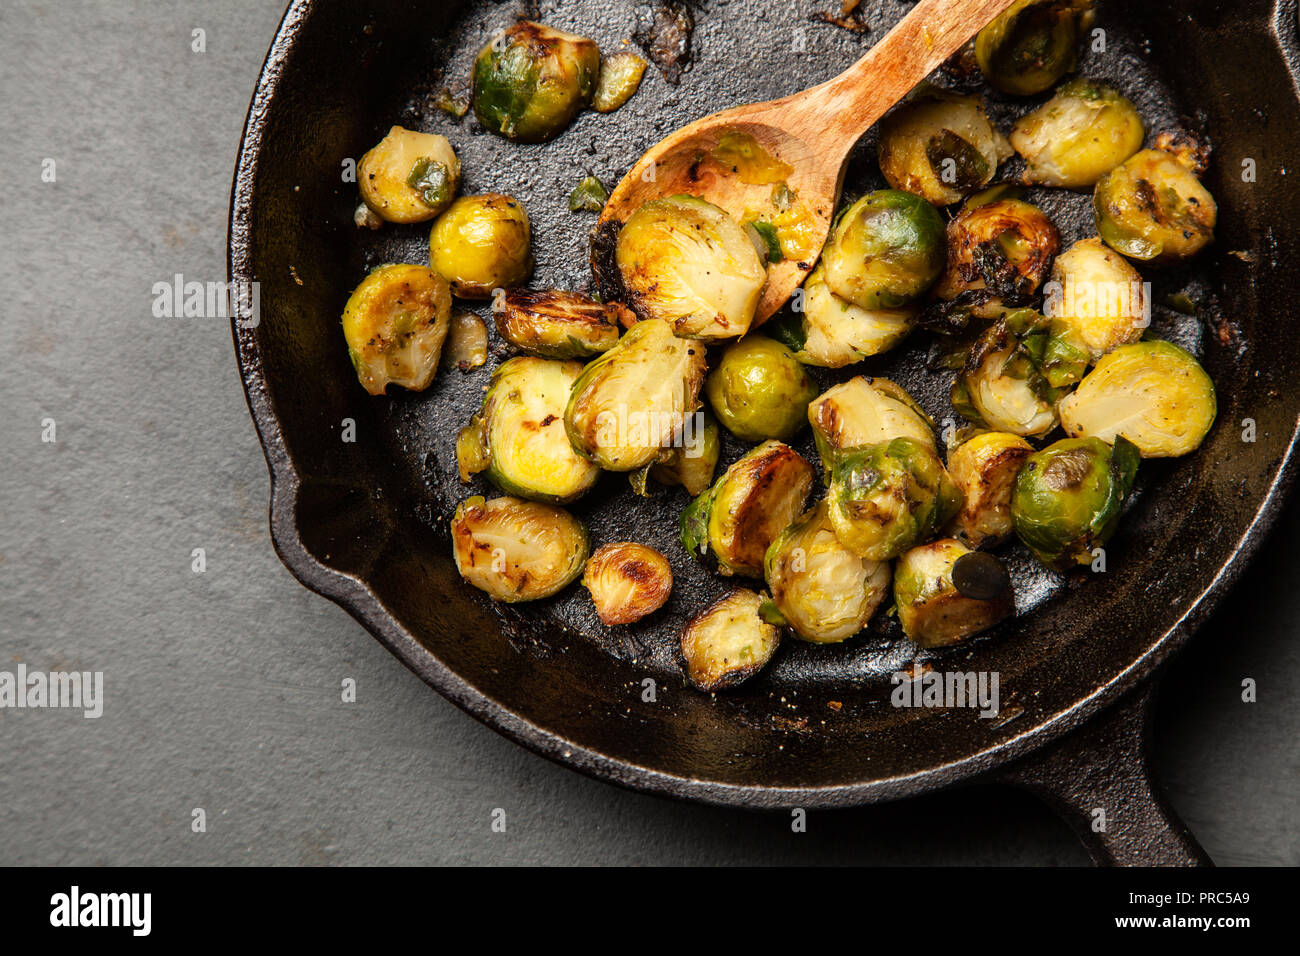 Roasted brussles sprouts Stock Photo